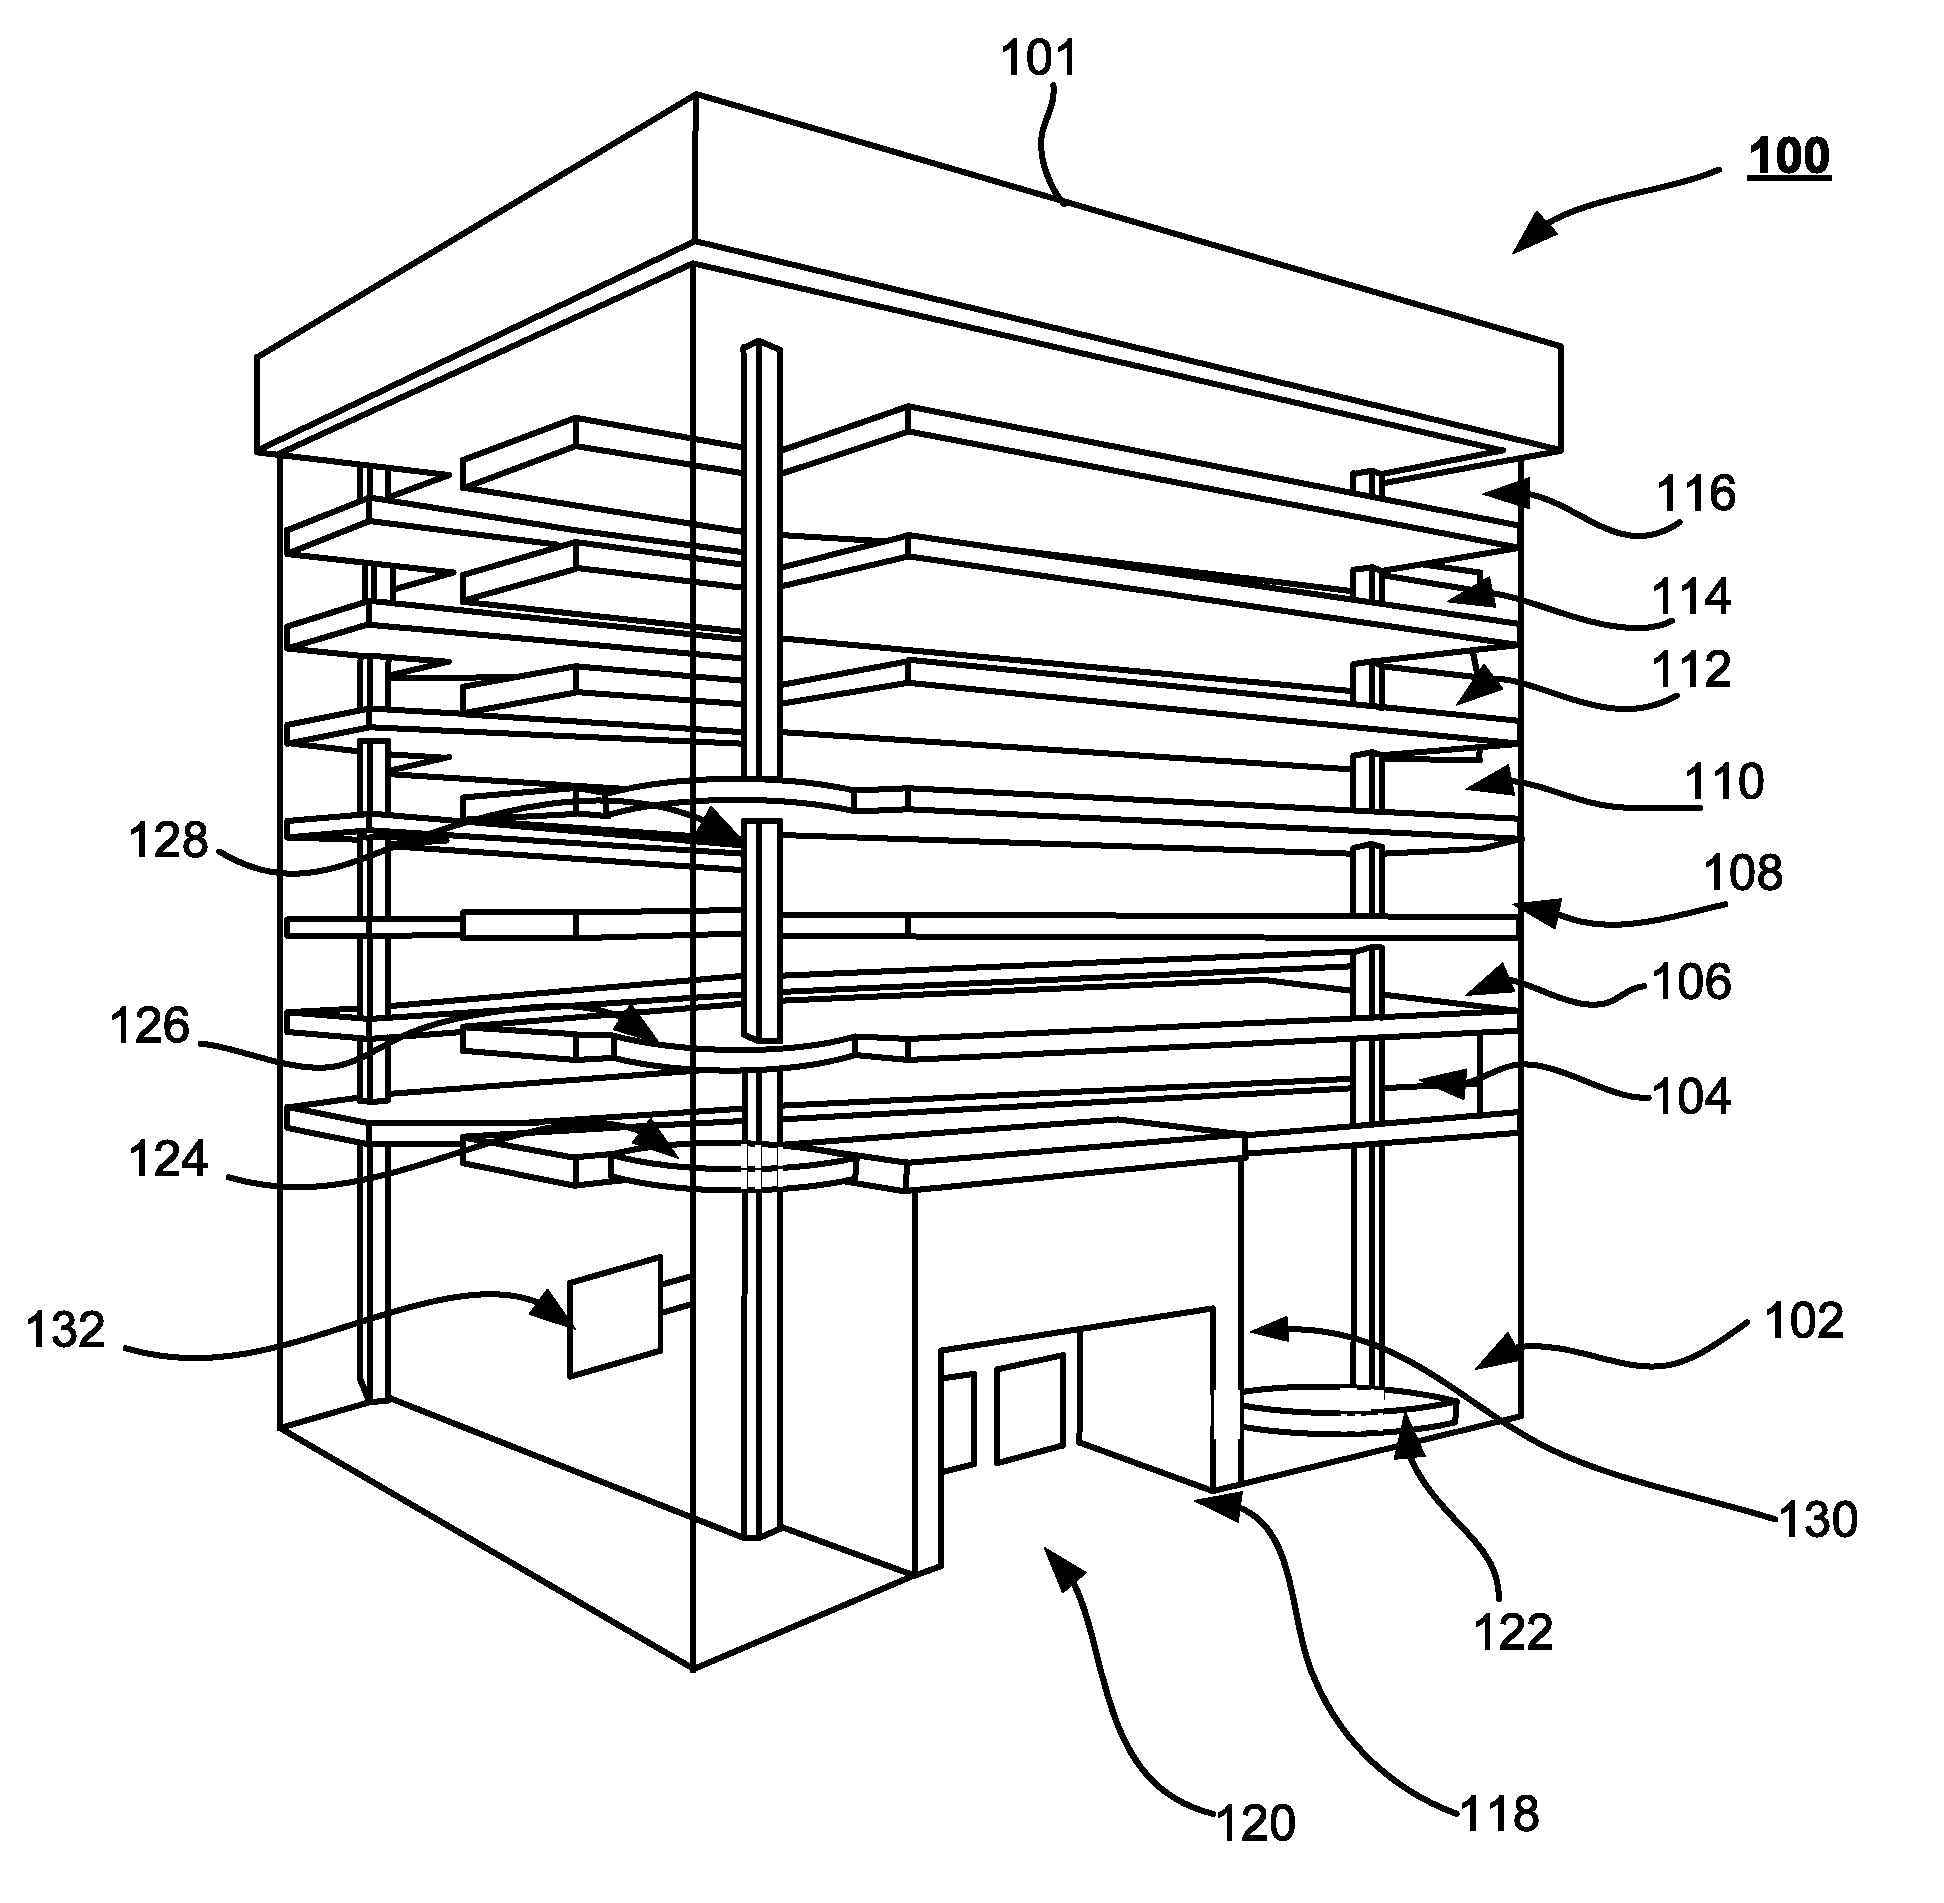 A system and method for automated goods storage and retrieval